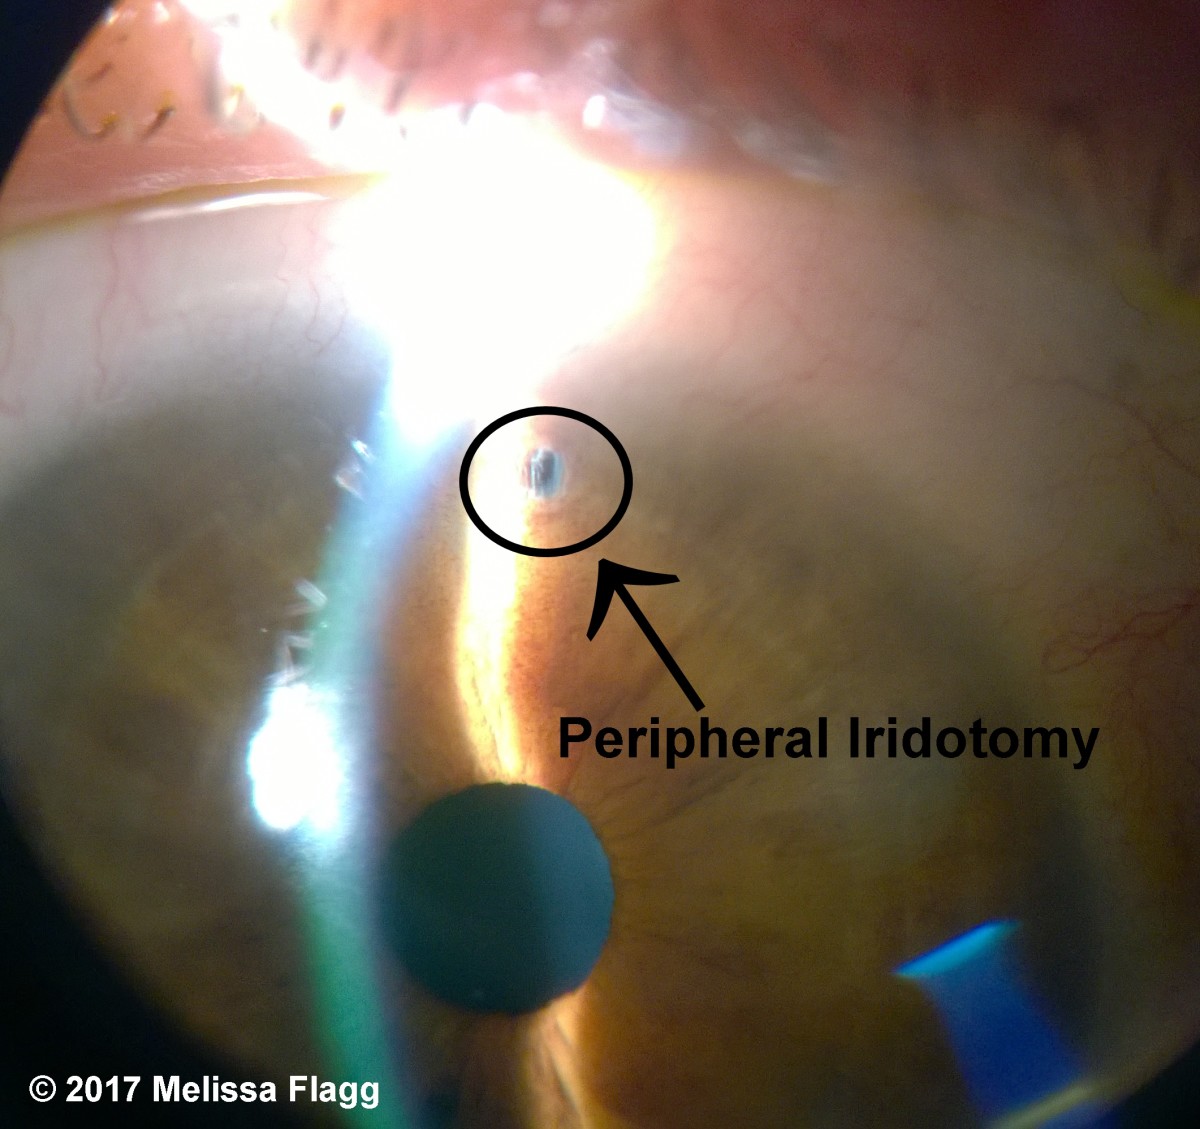 An image of a completed peripheral iridotomy